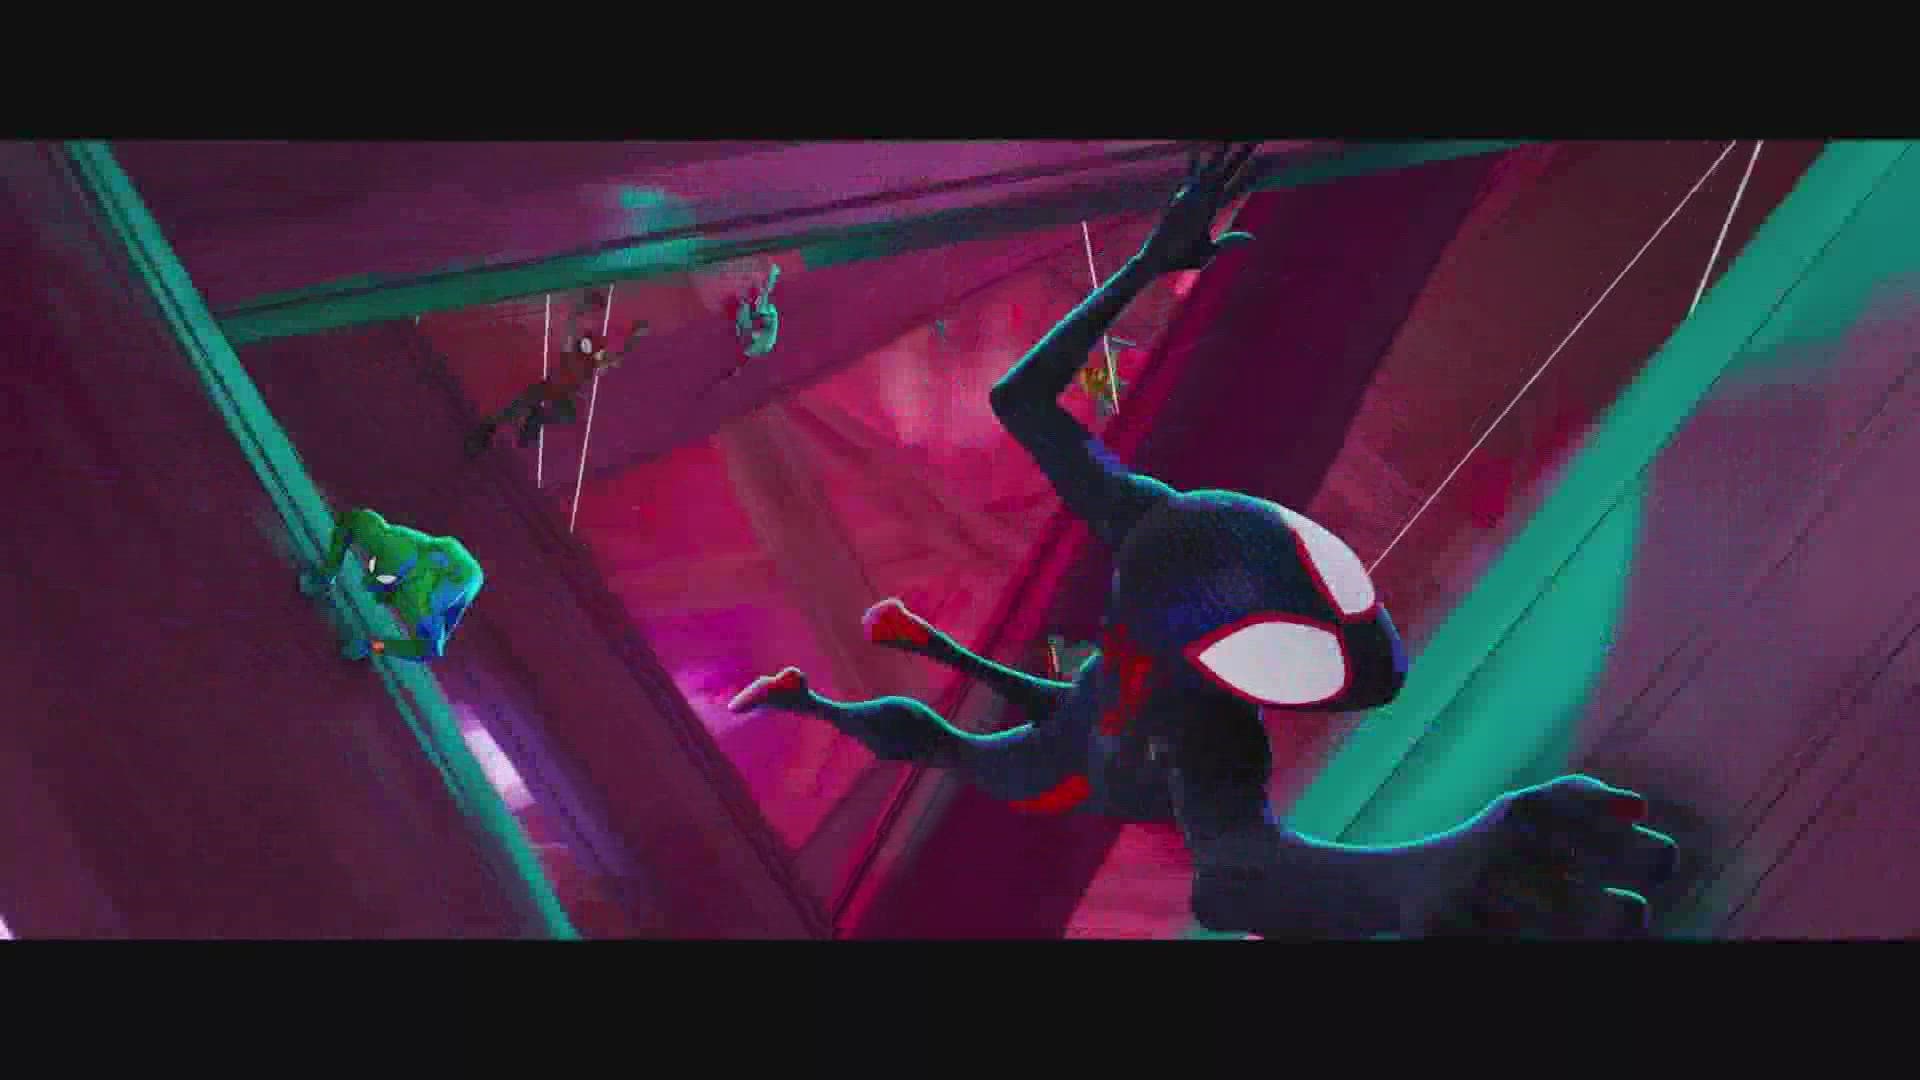 Spider-Man: Across the Spider-Verse shares new teaser for sequel